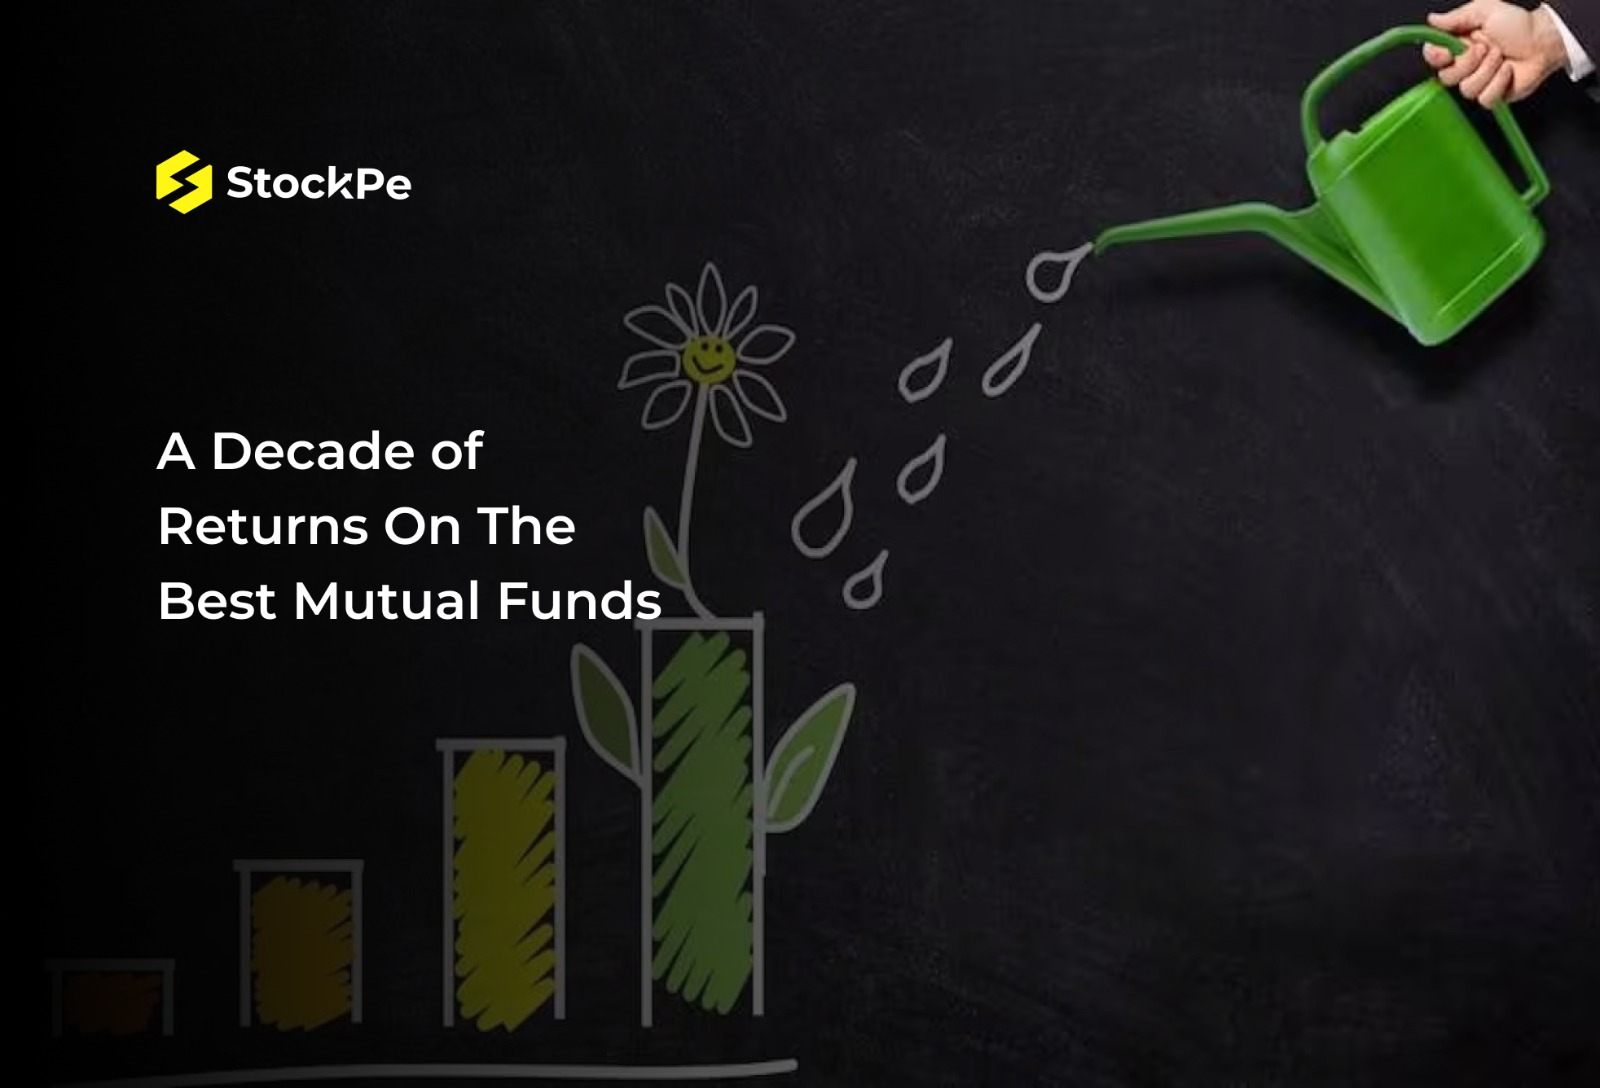 Average Return on Best Performing Mutual Funds